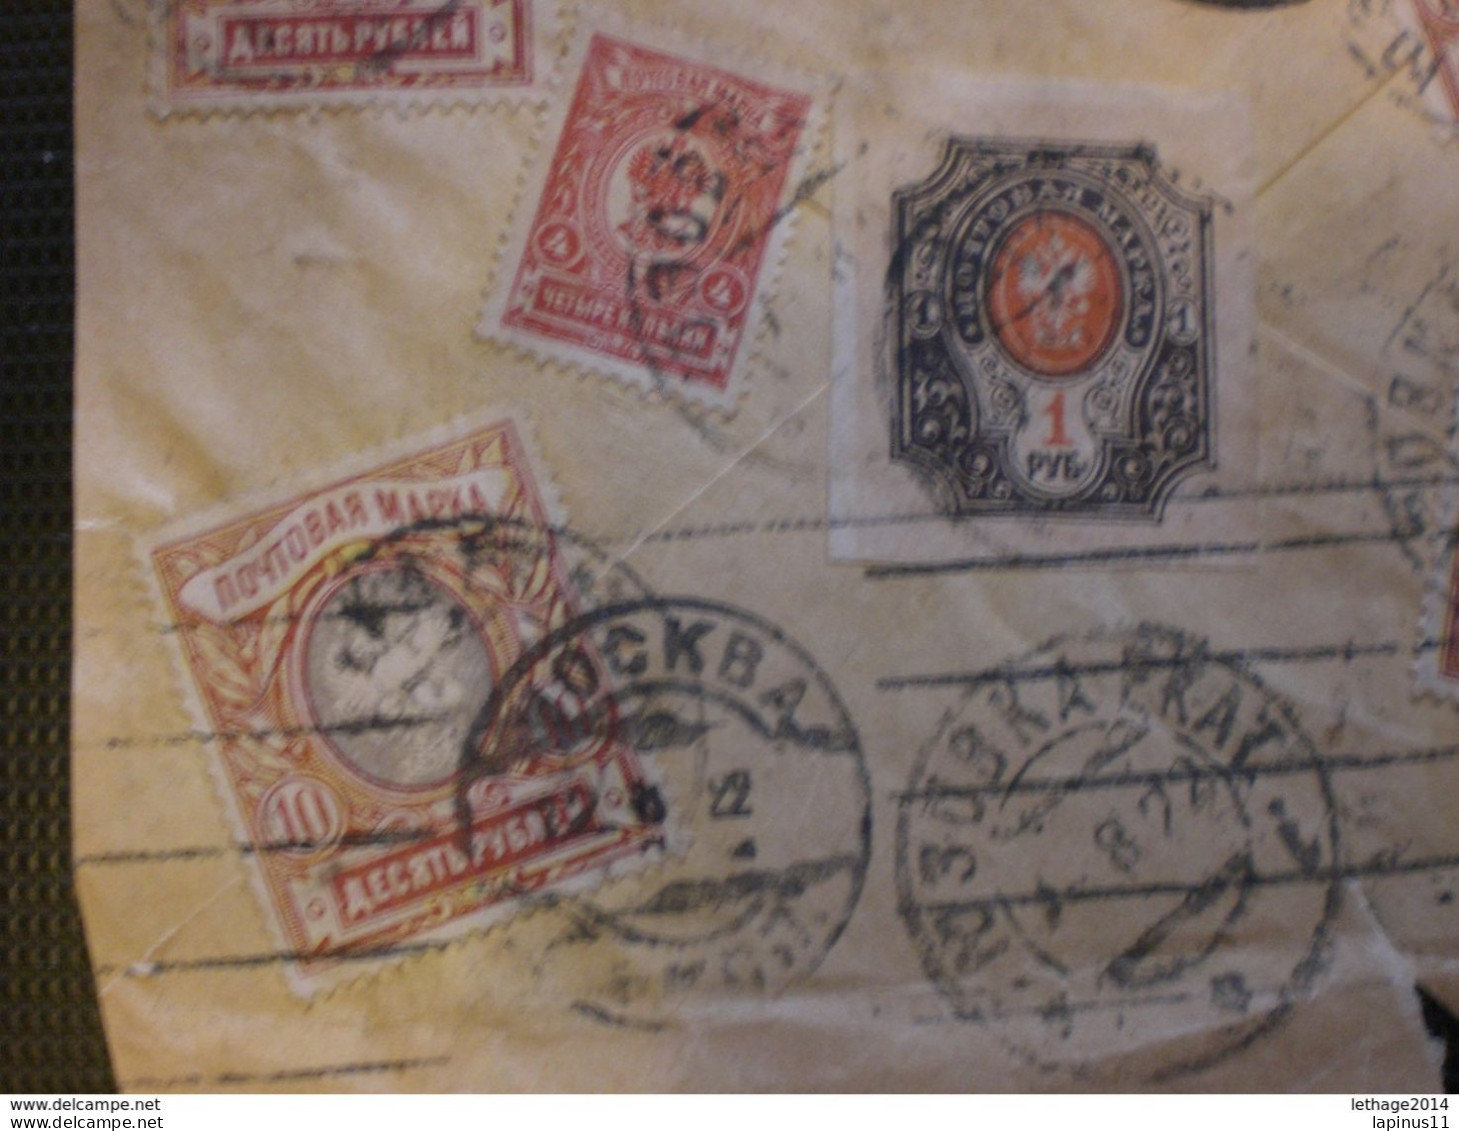 RUSSIA RUSSIE РОССИЯ STAMPS COVER 1922 REGISTER MAIL RUSSIA TO ITALY OVER STAMPS FULL RRR RIF.TAGG. (127) - Covers & Documents